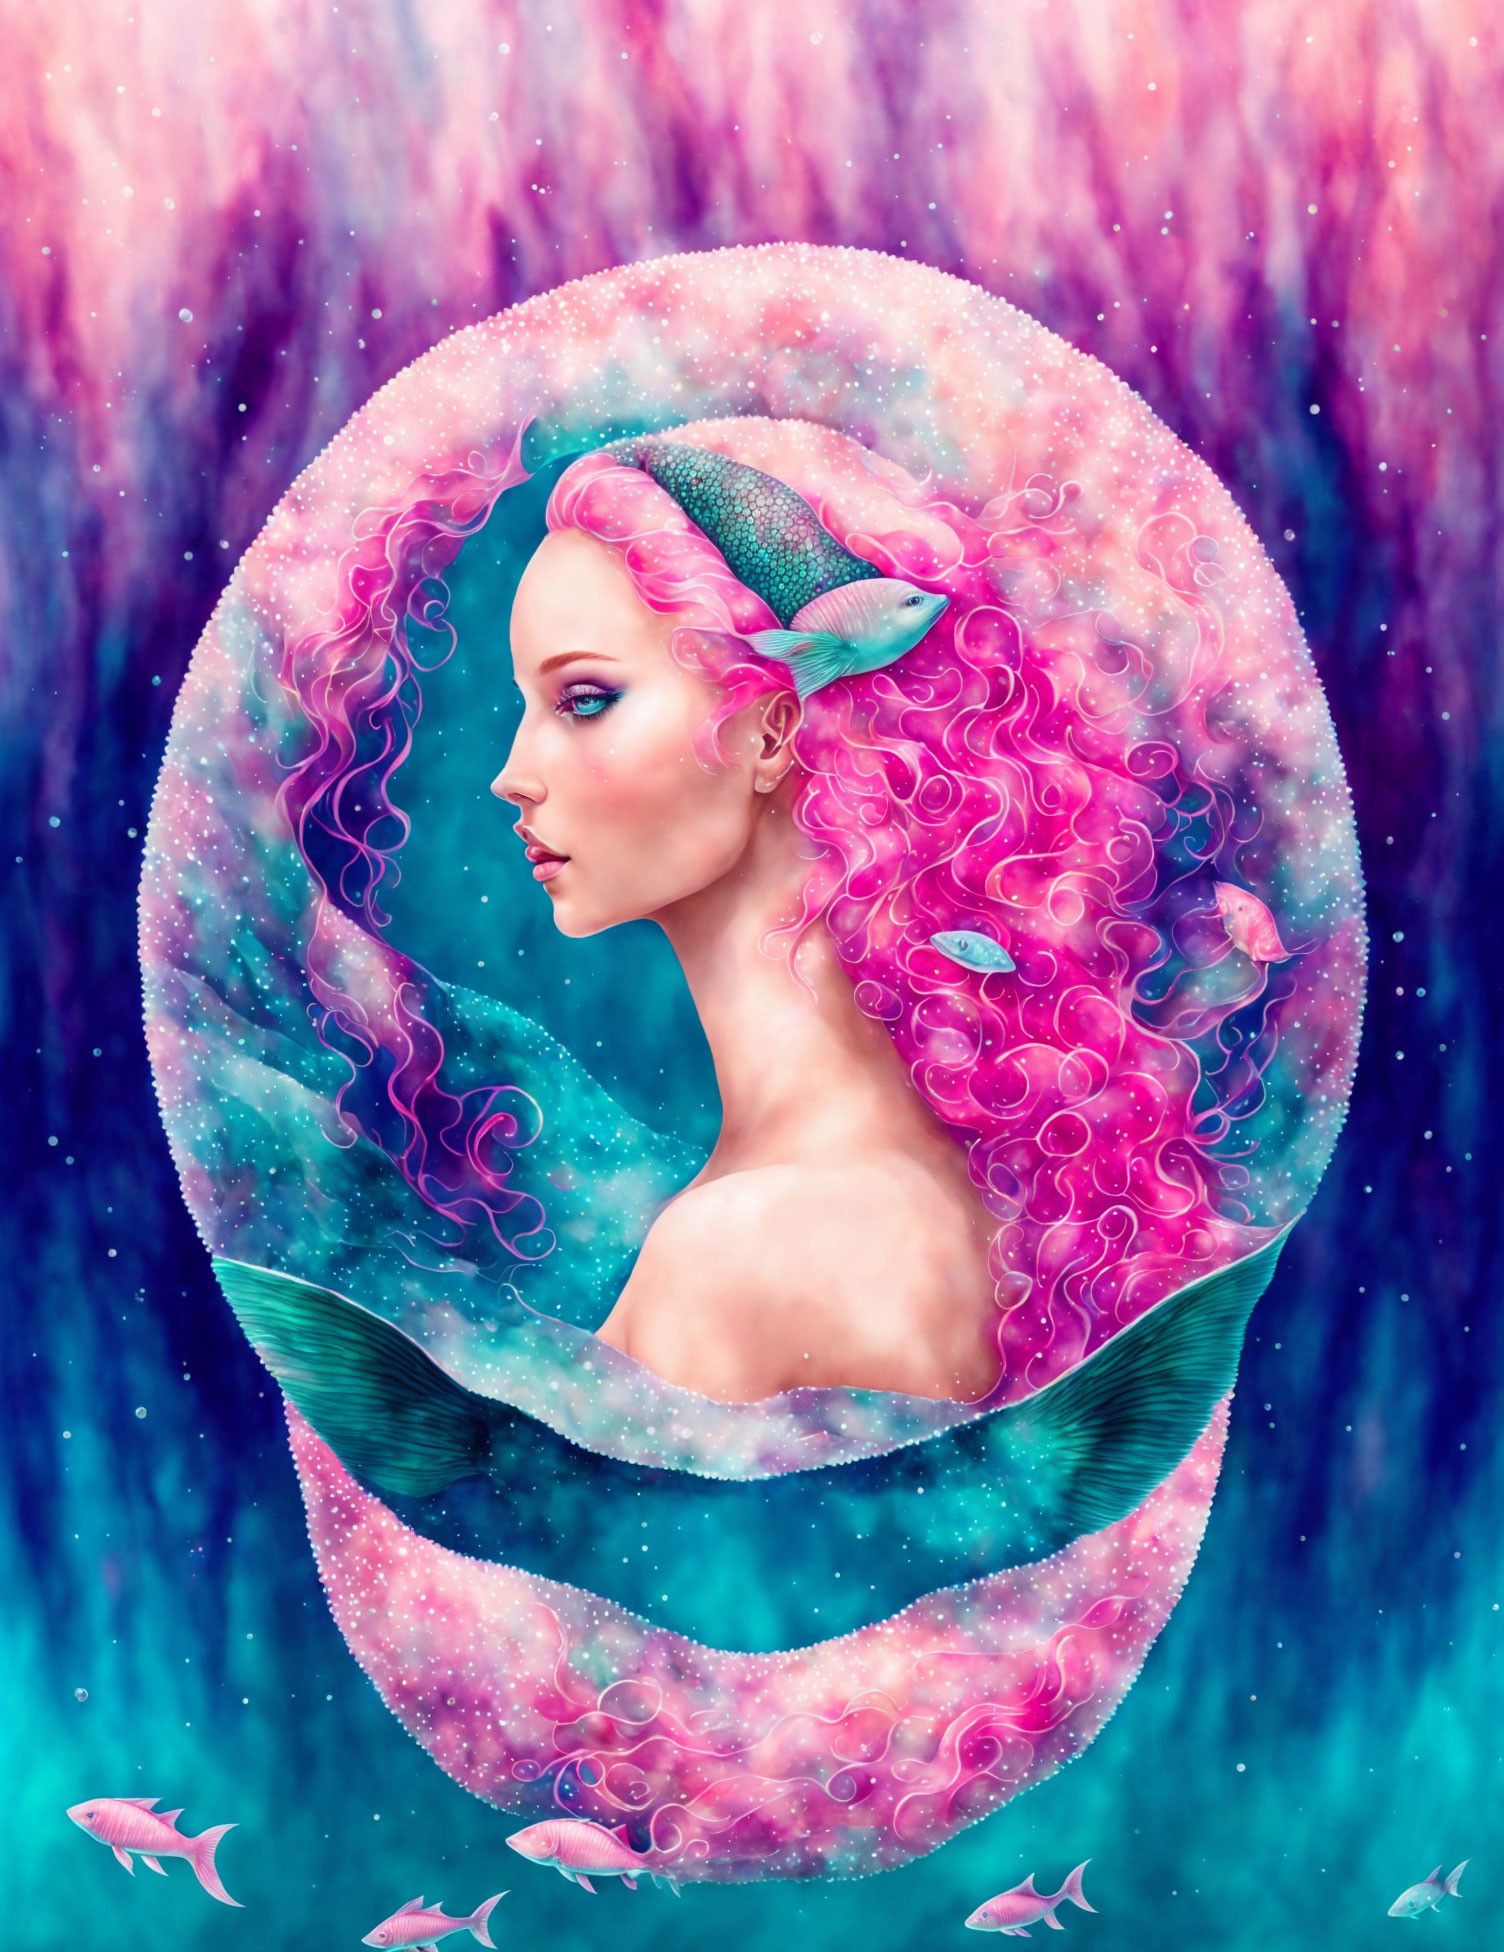 Surreal pink-haired woman in cosmic setting with fish, mermaid theme